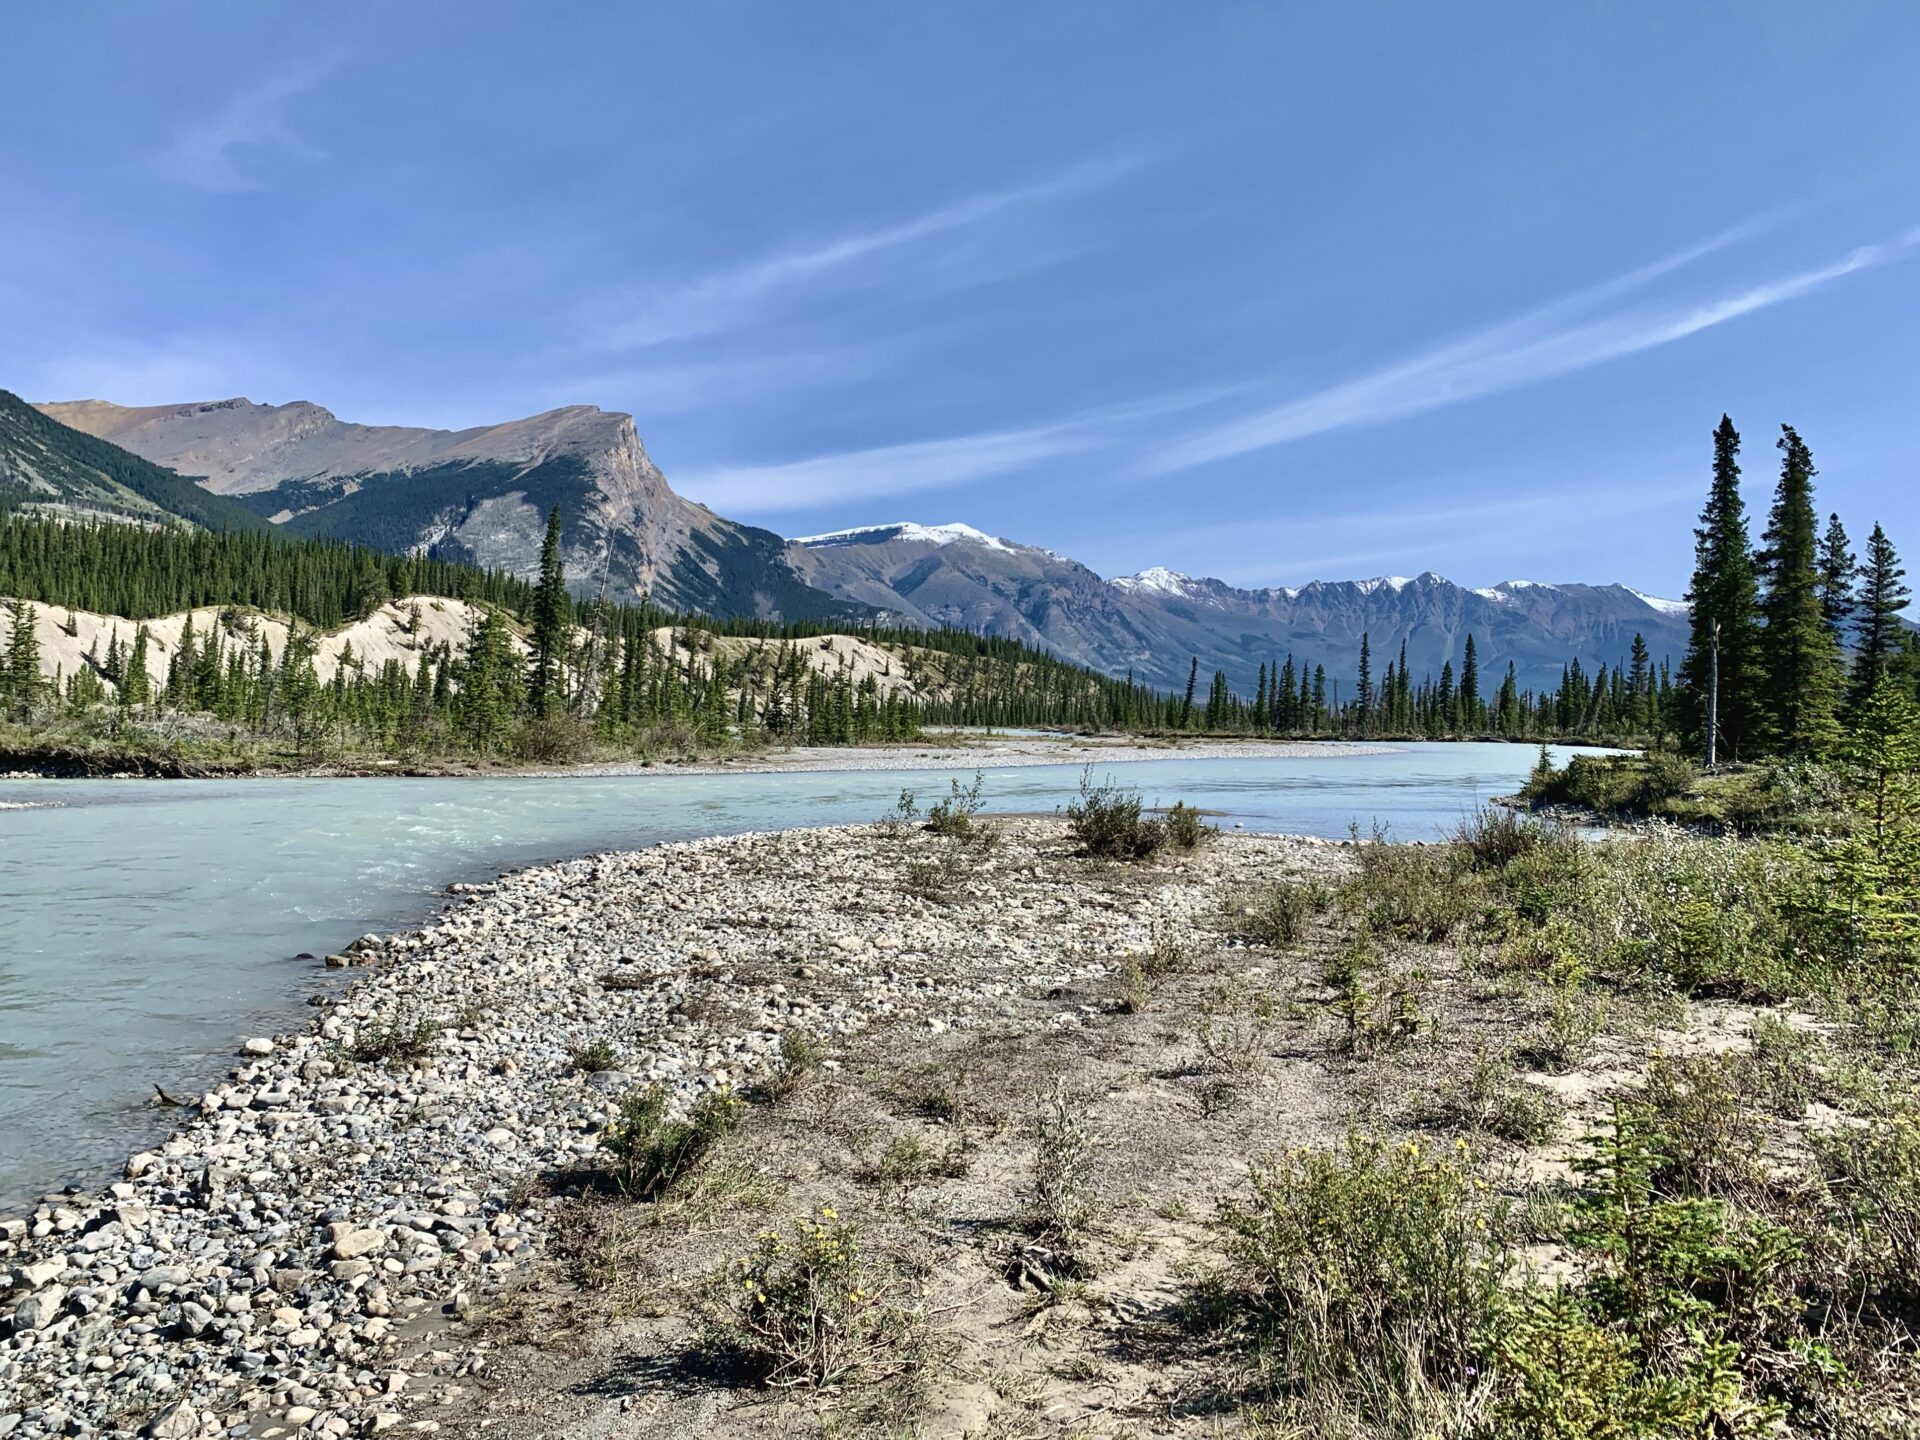 Saskatchewan River Crossing along the Icefields Parkway